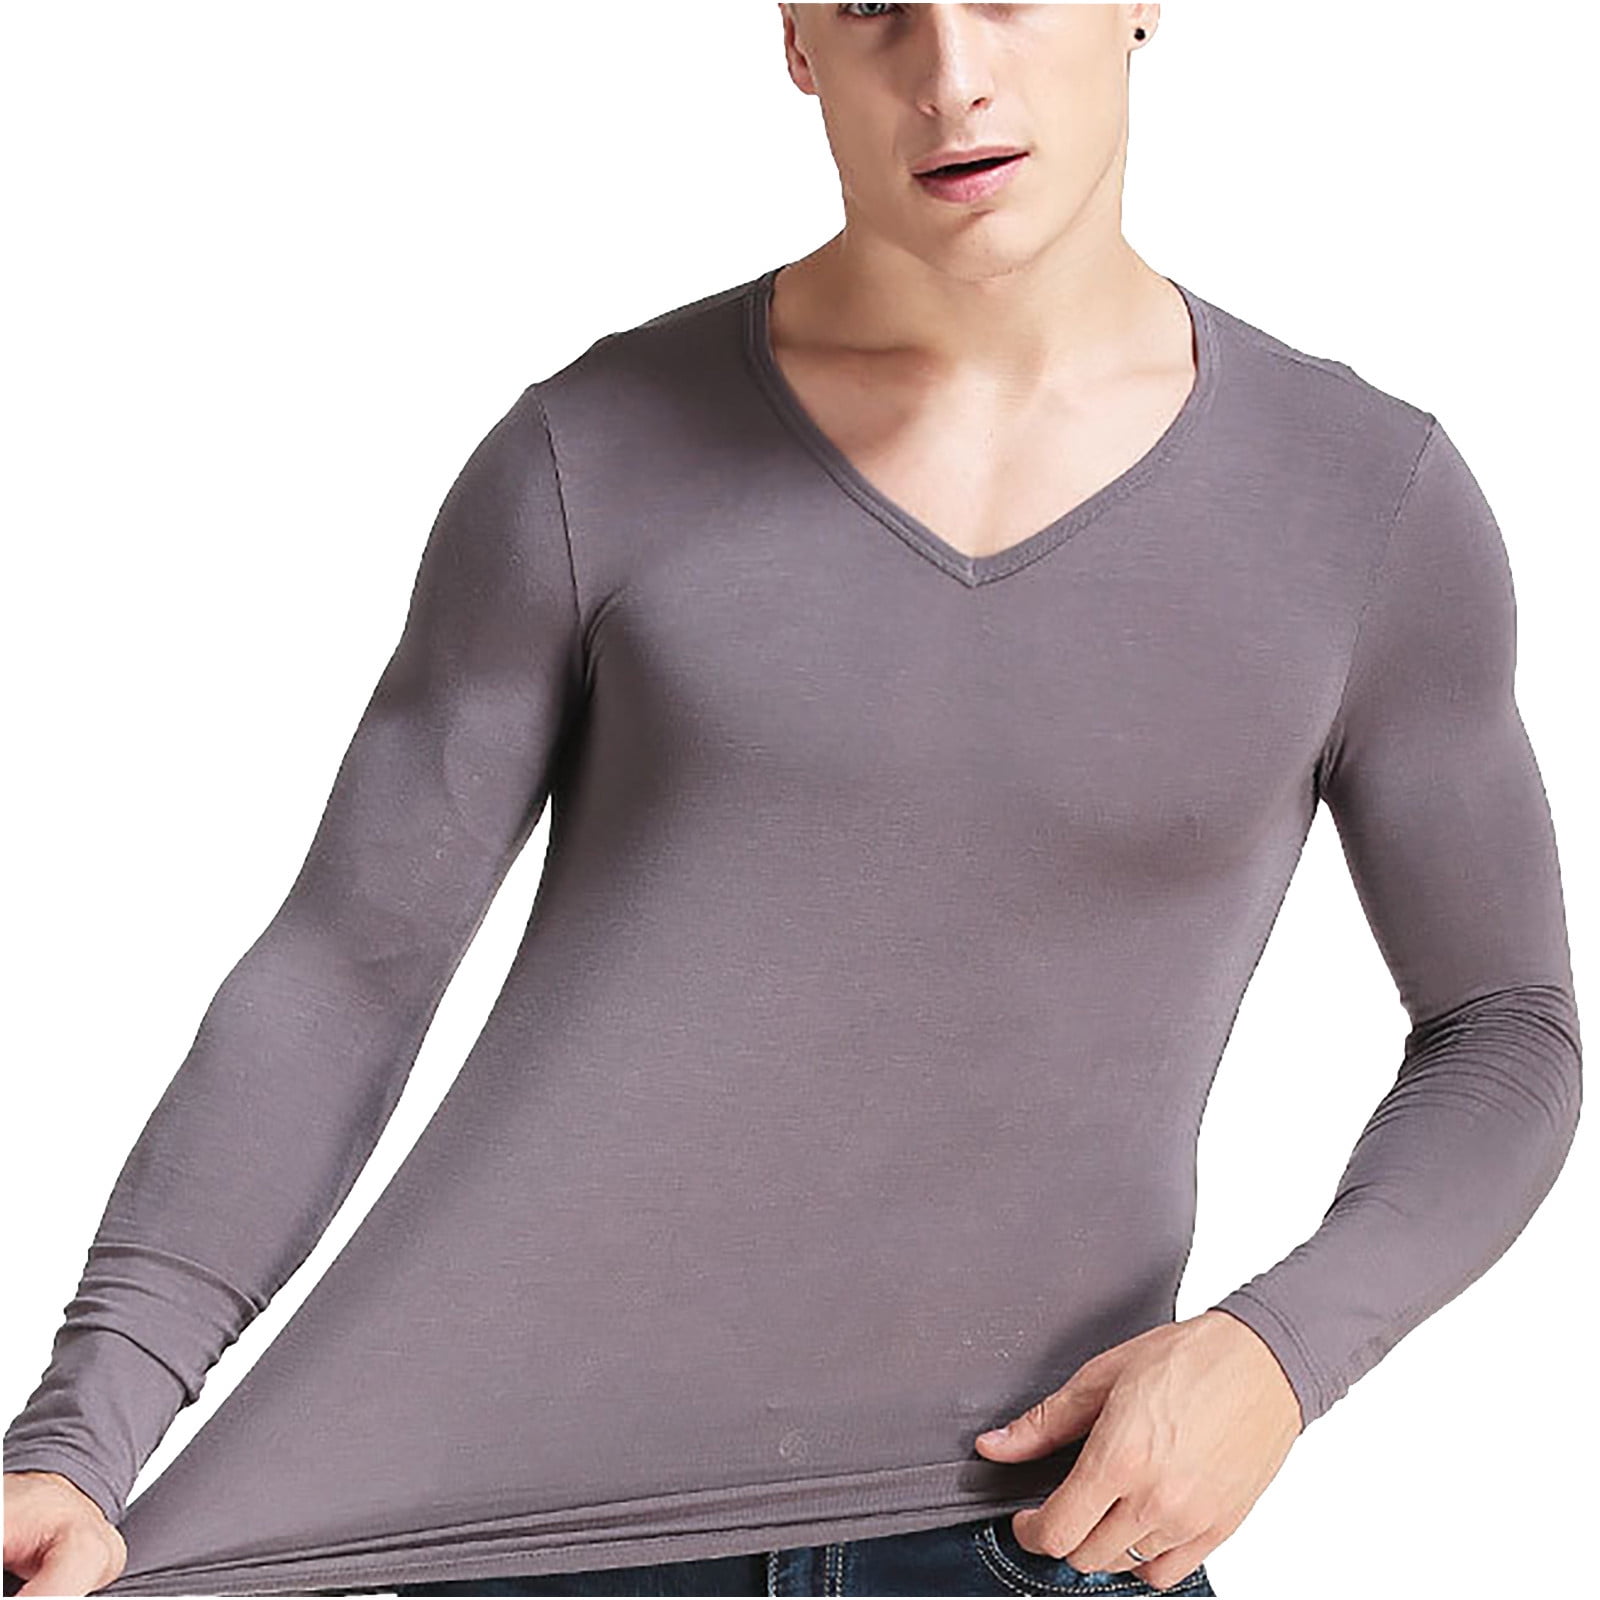 Chiccall Men's Thermal Underwear Long Sleeve V Neck Slim Fit Basic